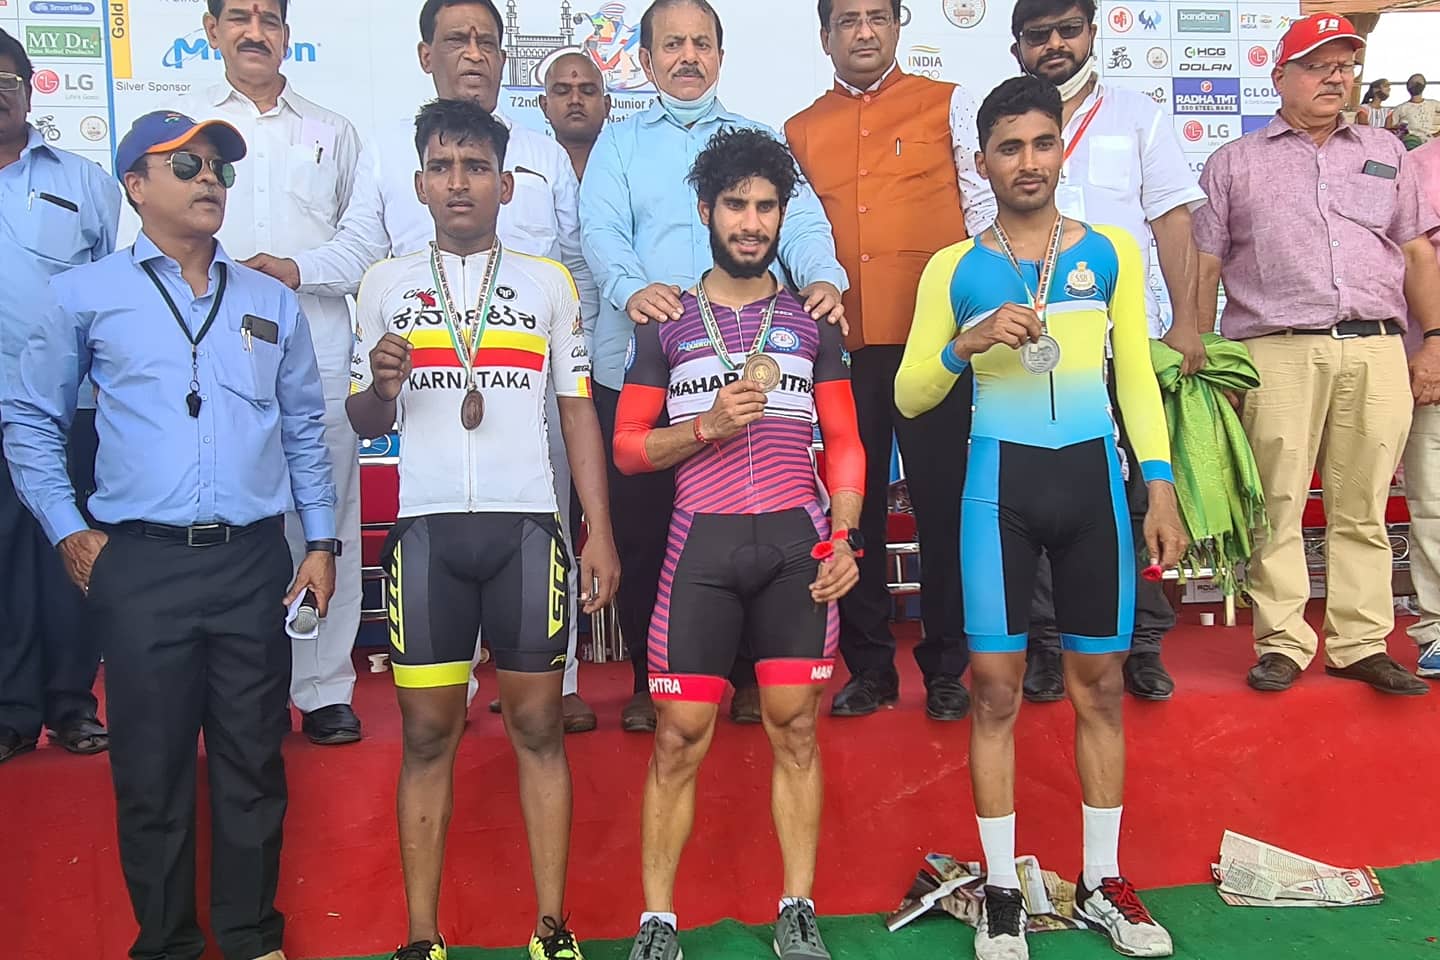 Surya Thathu at Track National Championship in Hyderabad